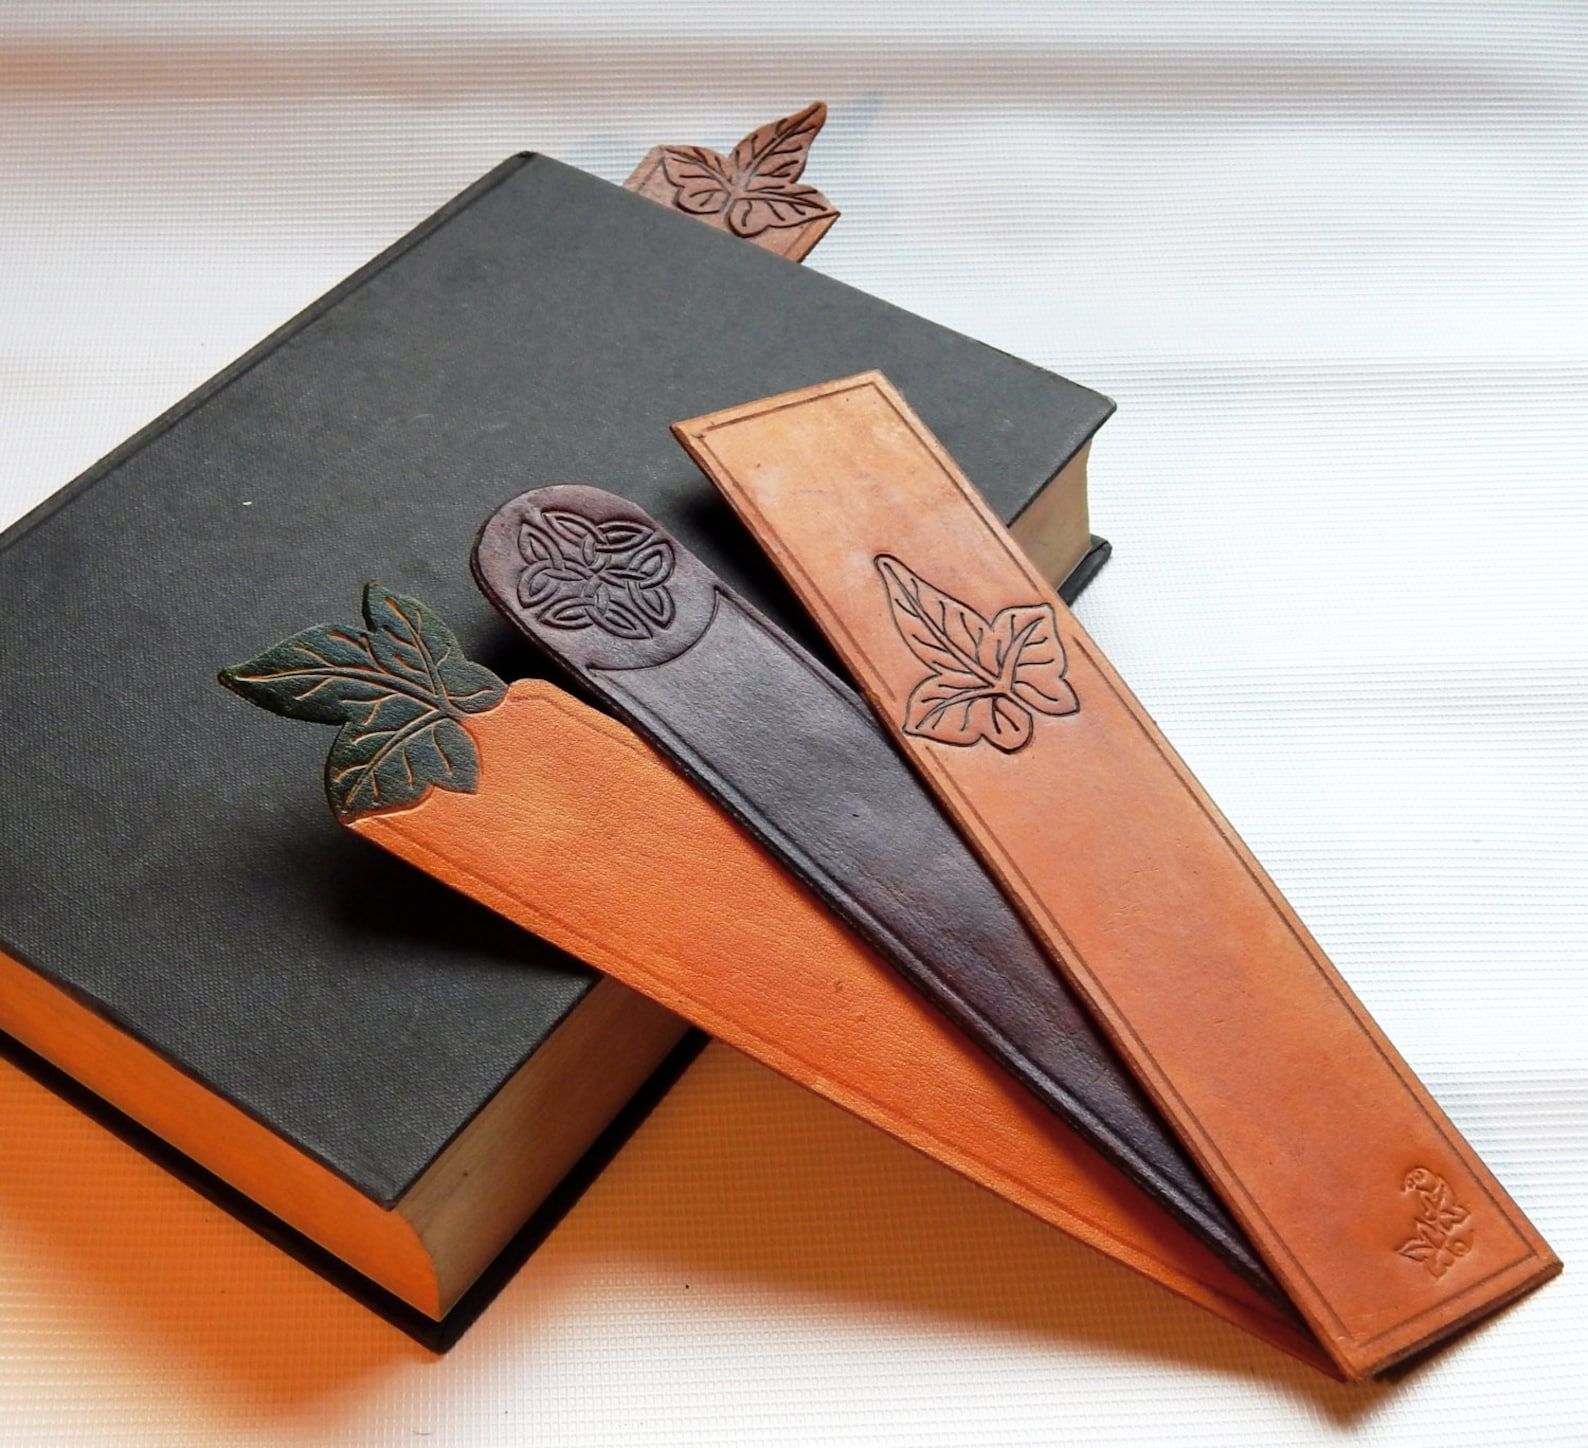 A set of three leather bookmarks embossed with leaves